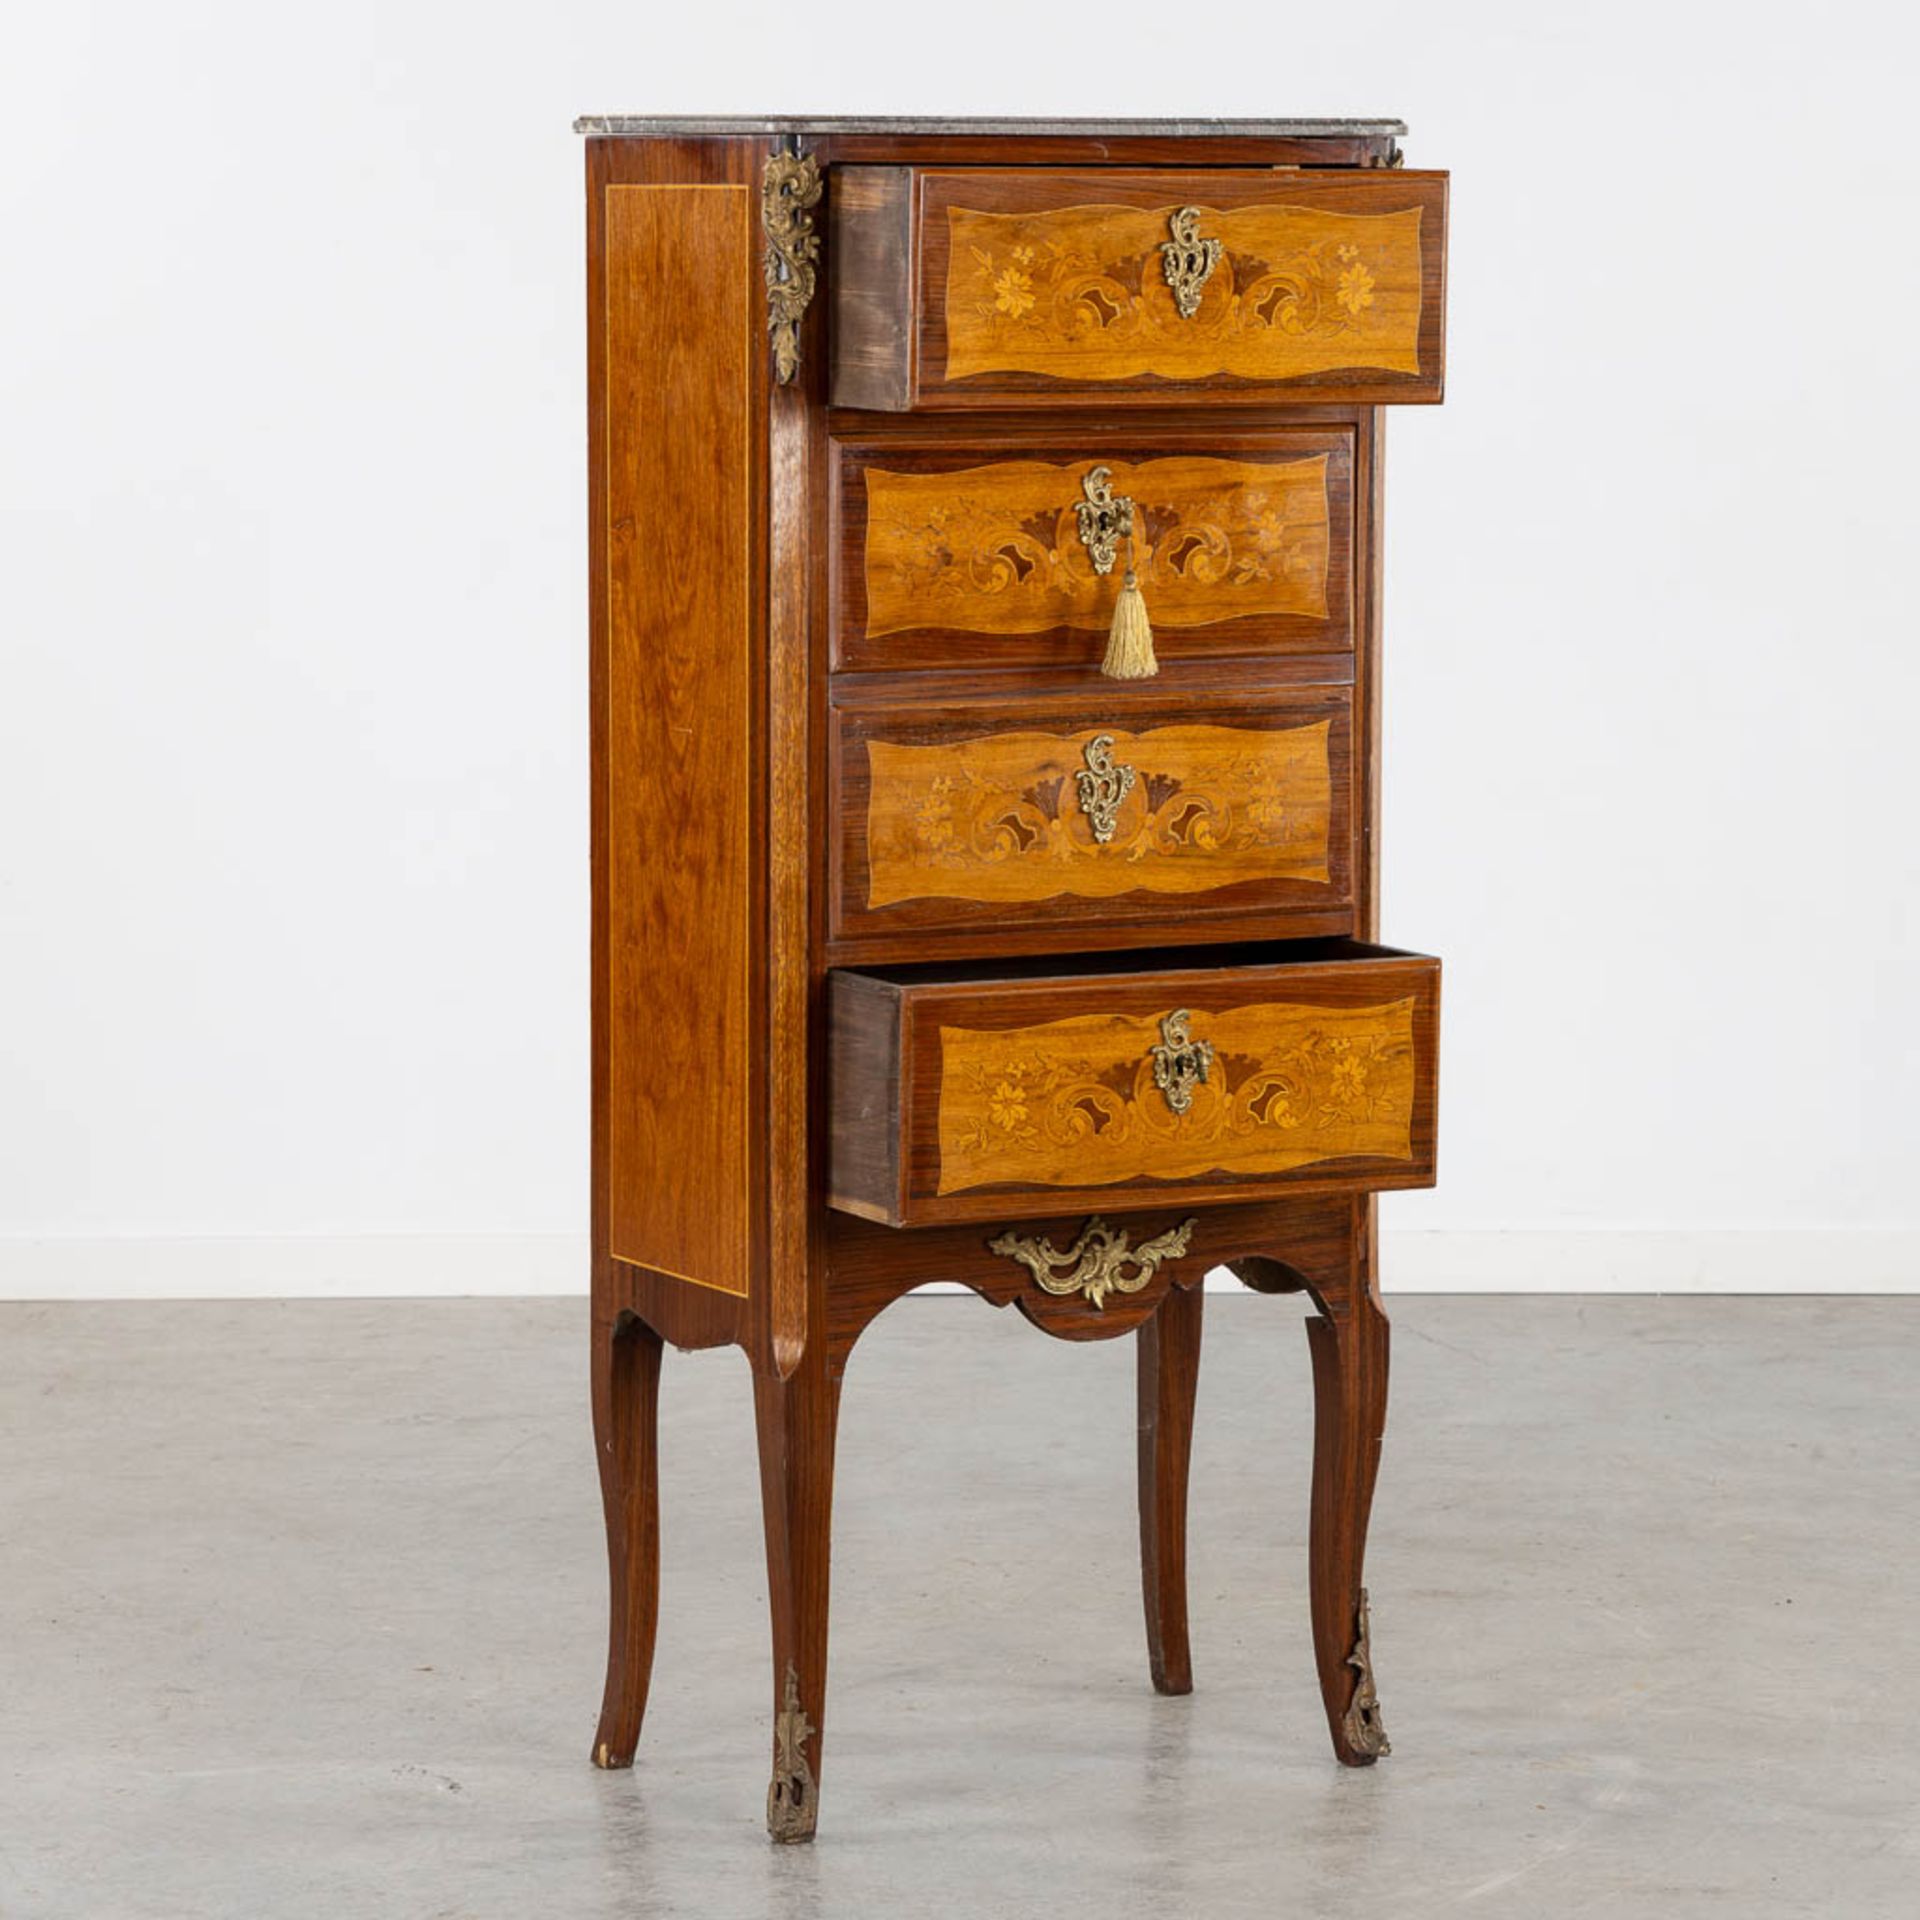 A Secretaire cabinet, Marquetry inlay and mounted with bronze. Circa 1900. (L:34 x W:56 x H:128 cm) - Bild 5 aus 15